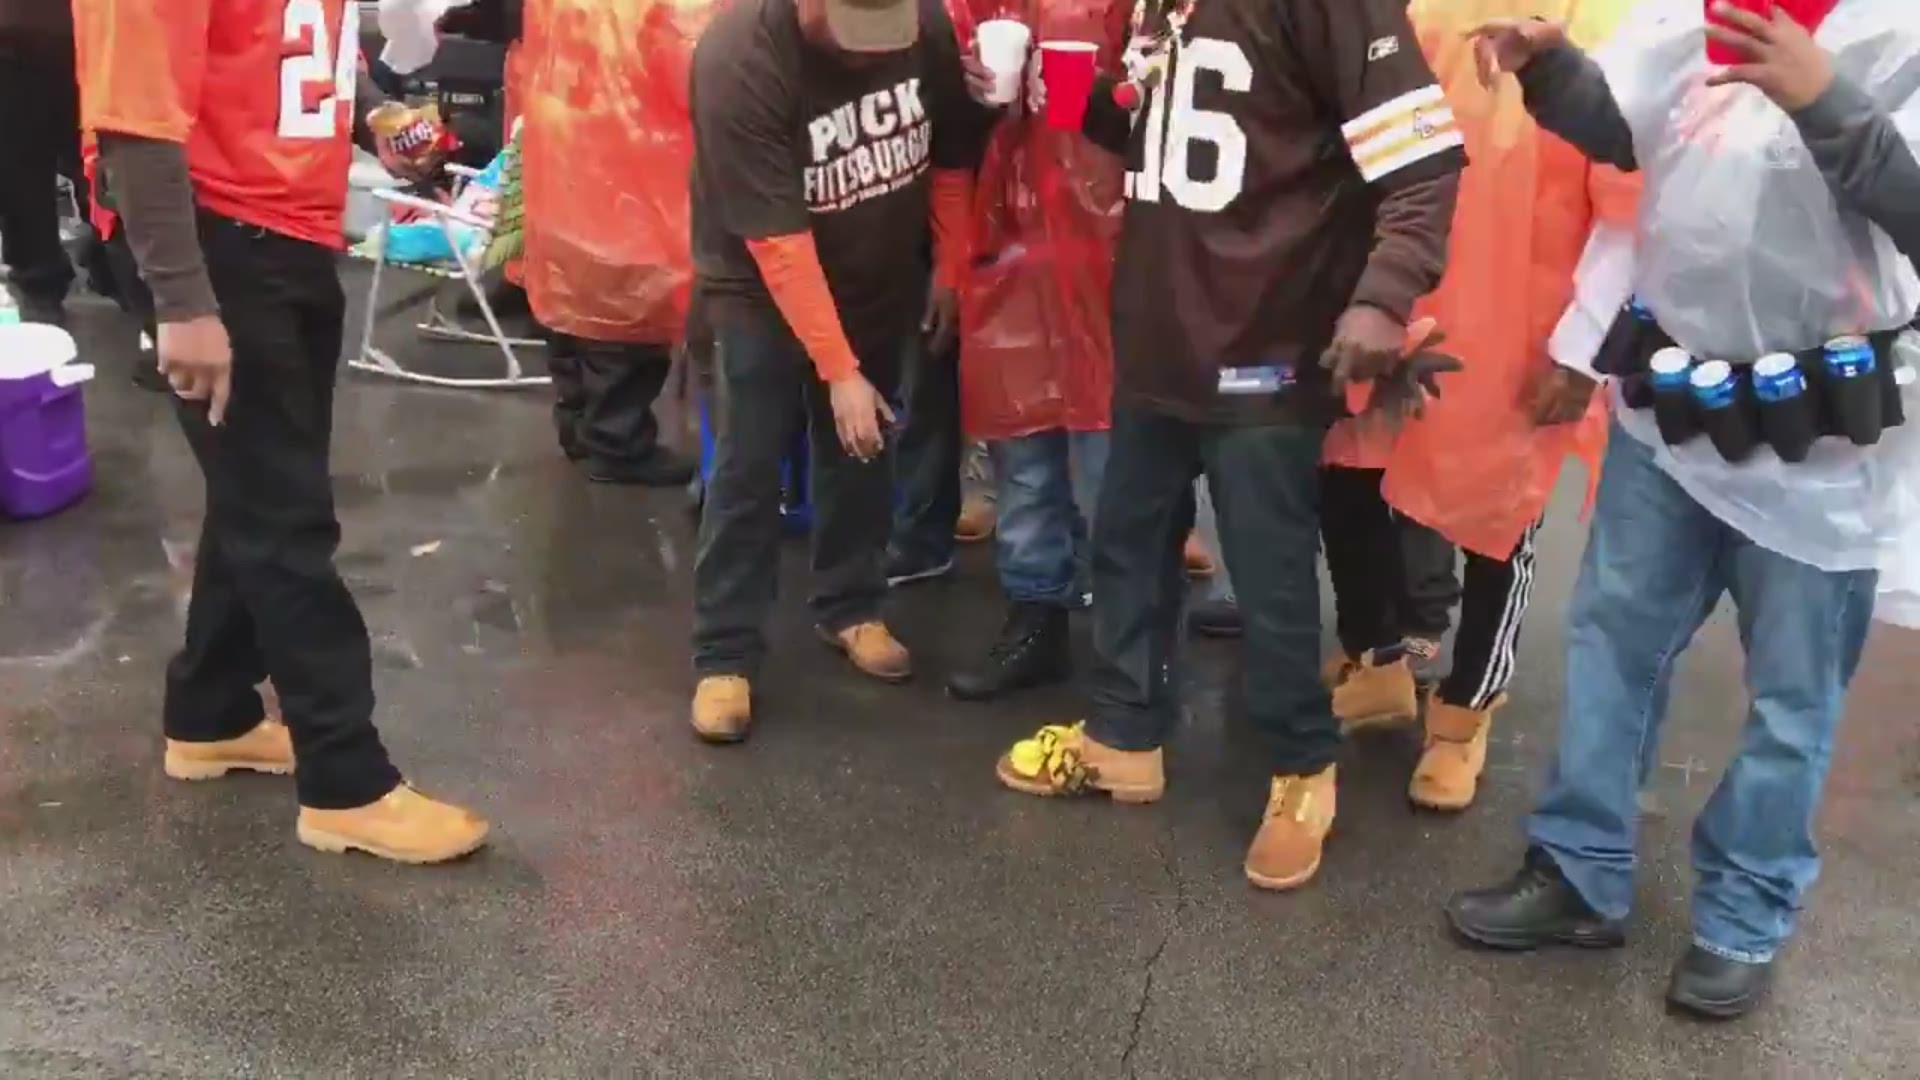 Cleveland Browns fans tailgated outside of Heinz Field in Pittsburgh ahead of today's game against the Steelers, and they were not shy about their support.